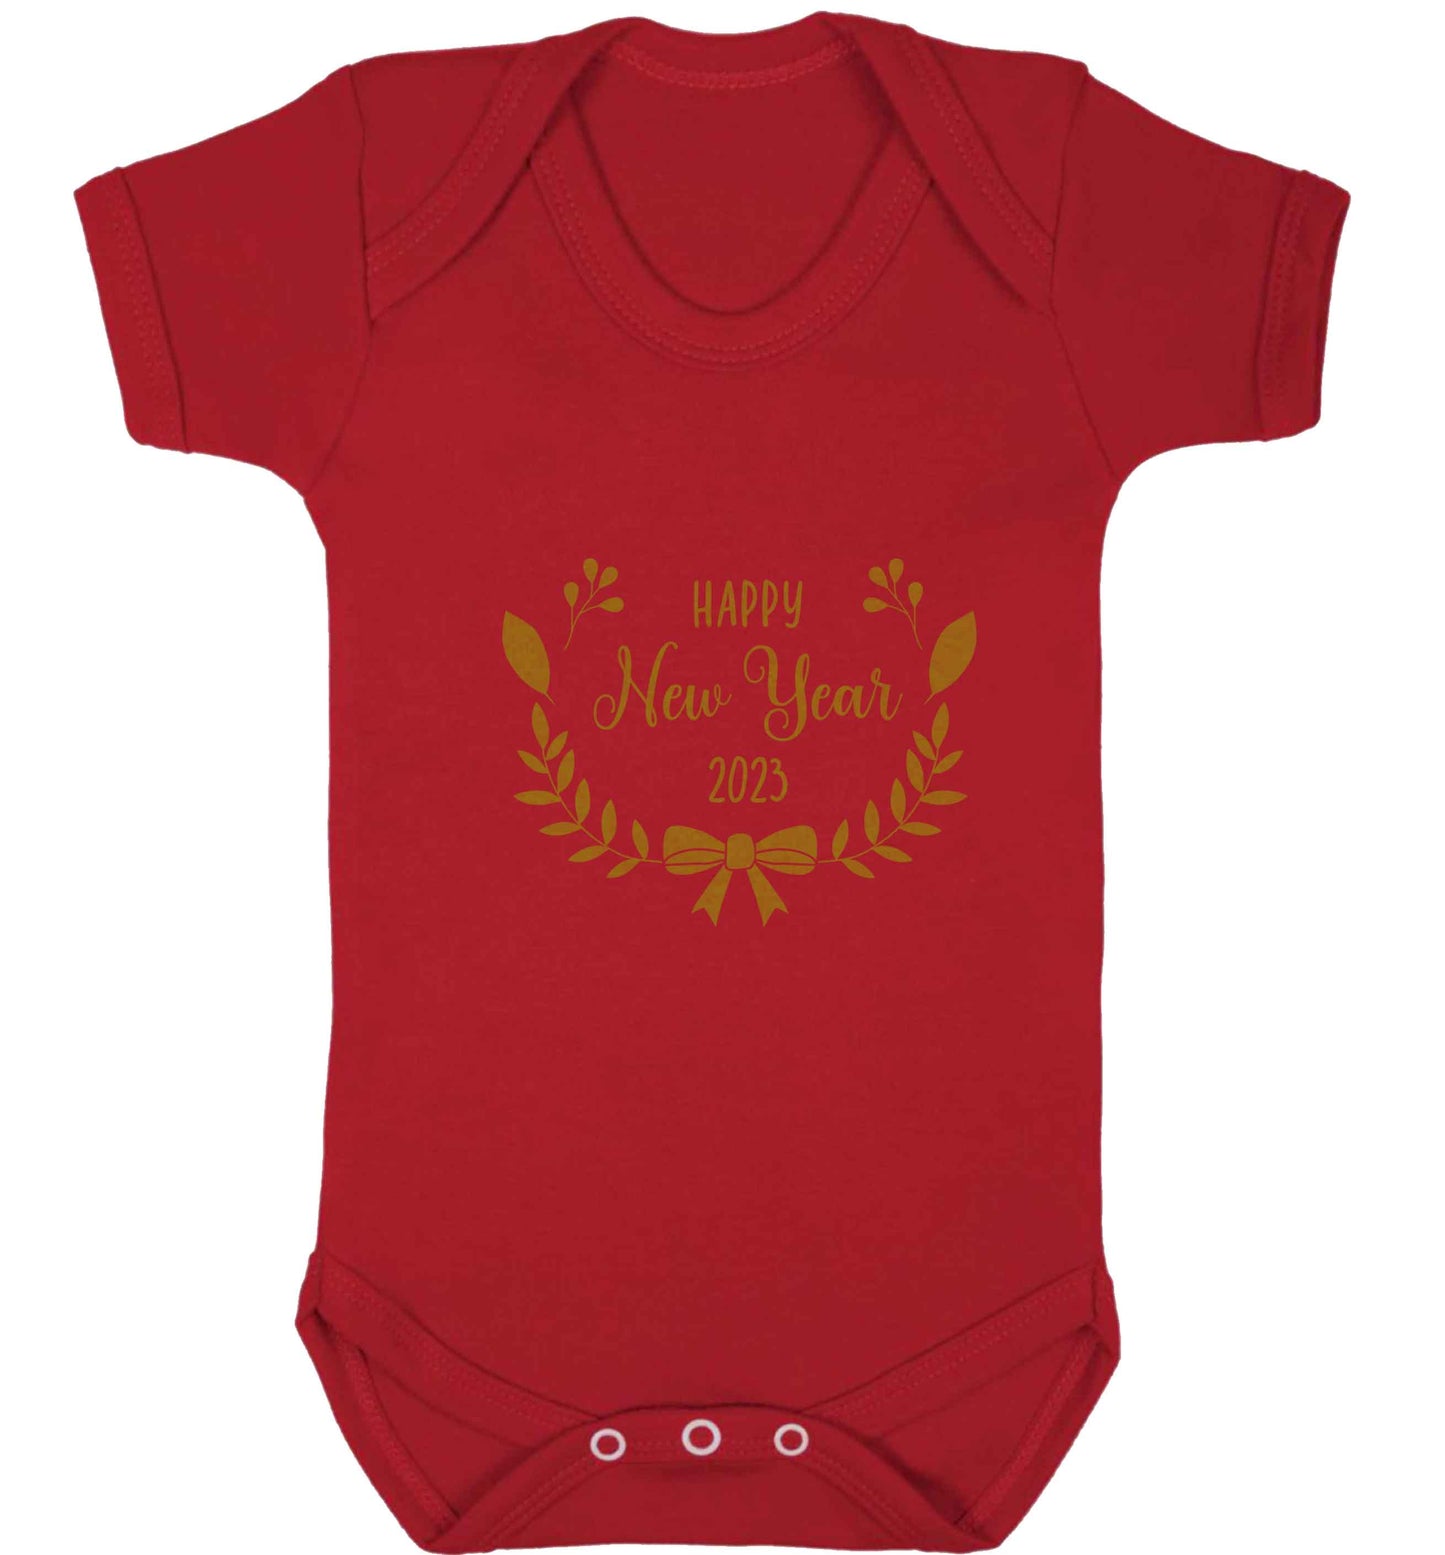 Happy New Year 2023 baby vest red 18-24 months